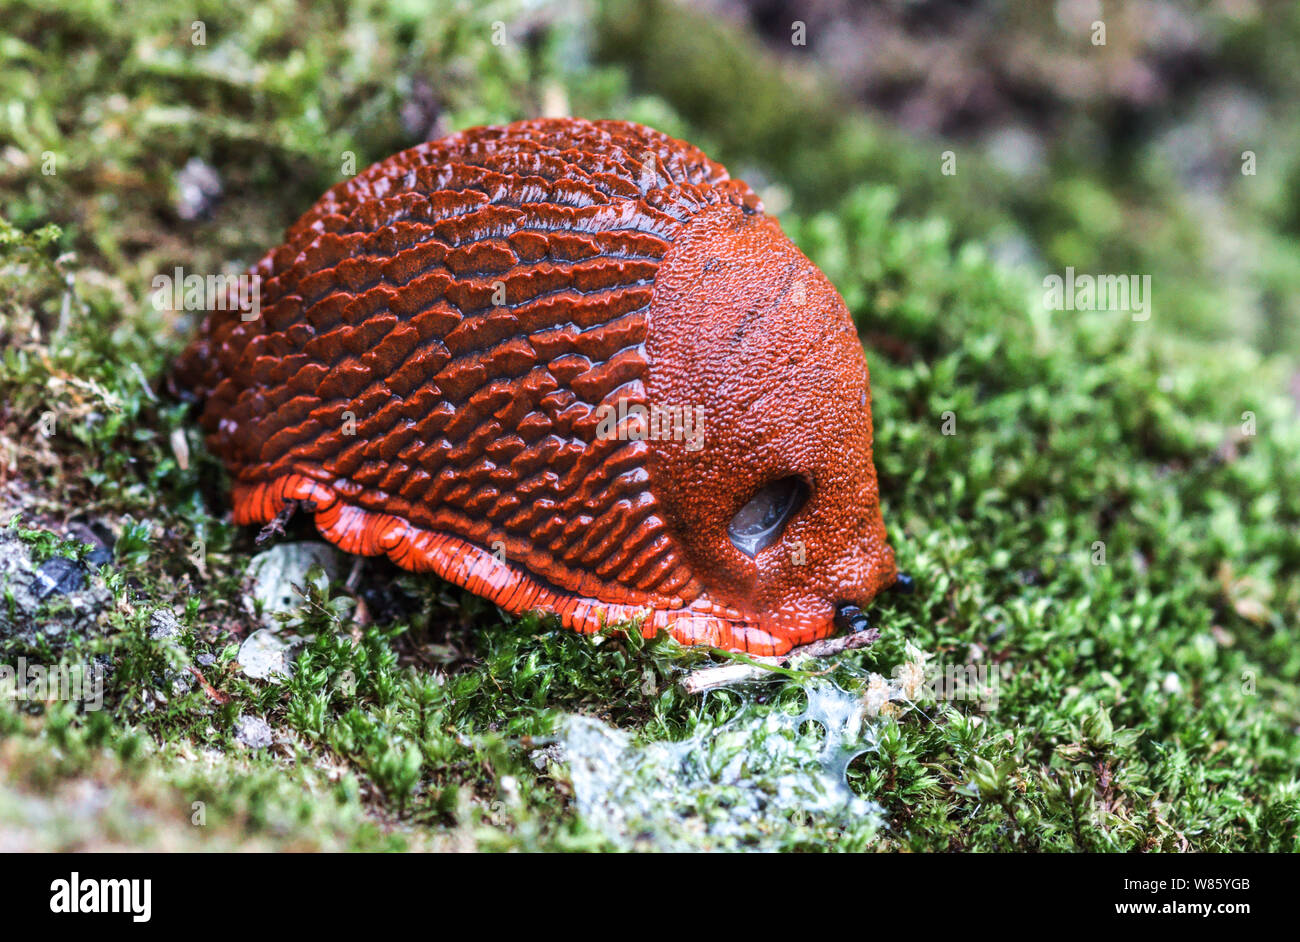 The Red Slug Arion rufus {ater}.A large robust slug common in my part of southwest France.This appears to be a defence posture. Stock Photo